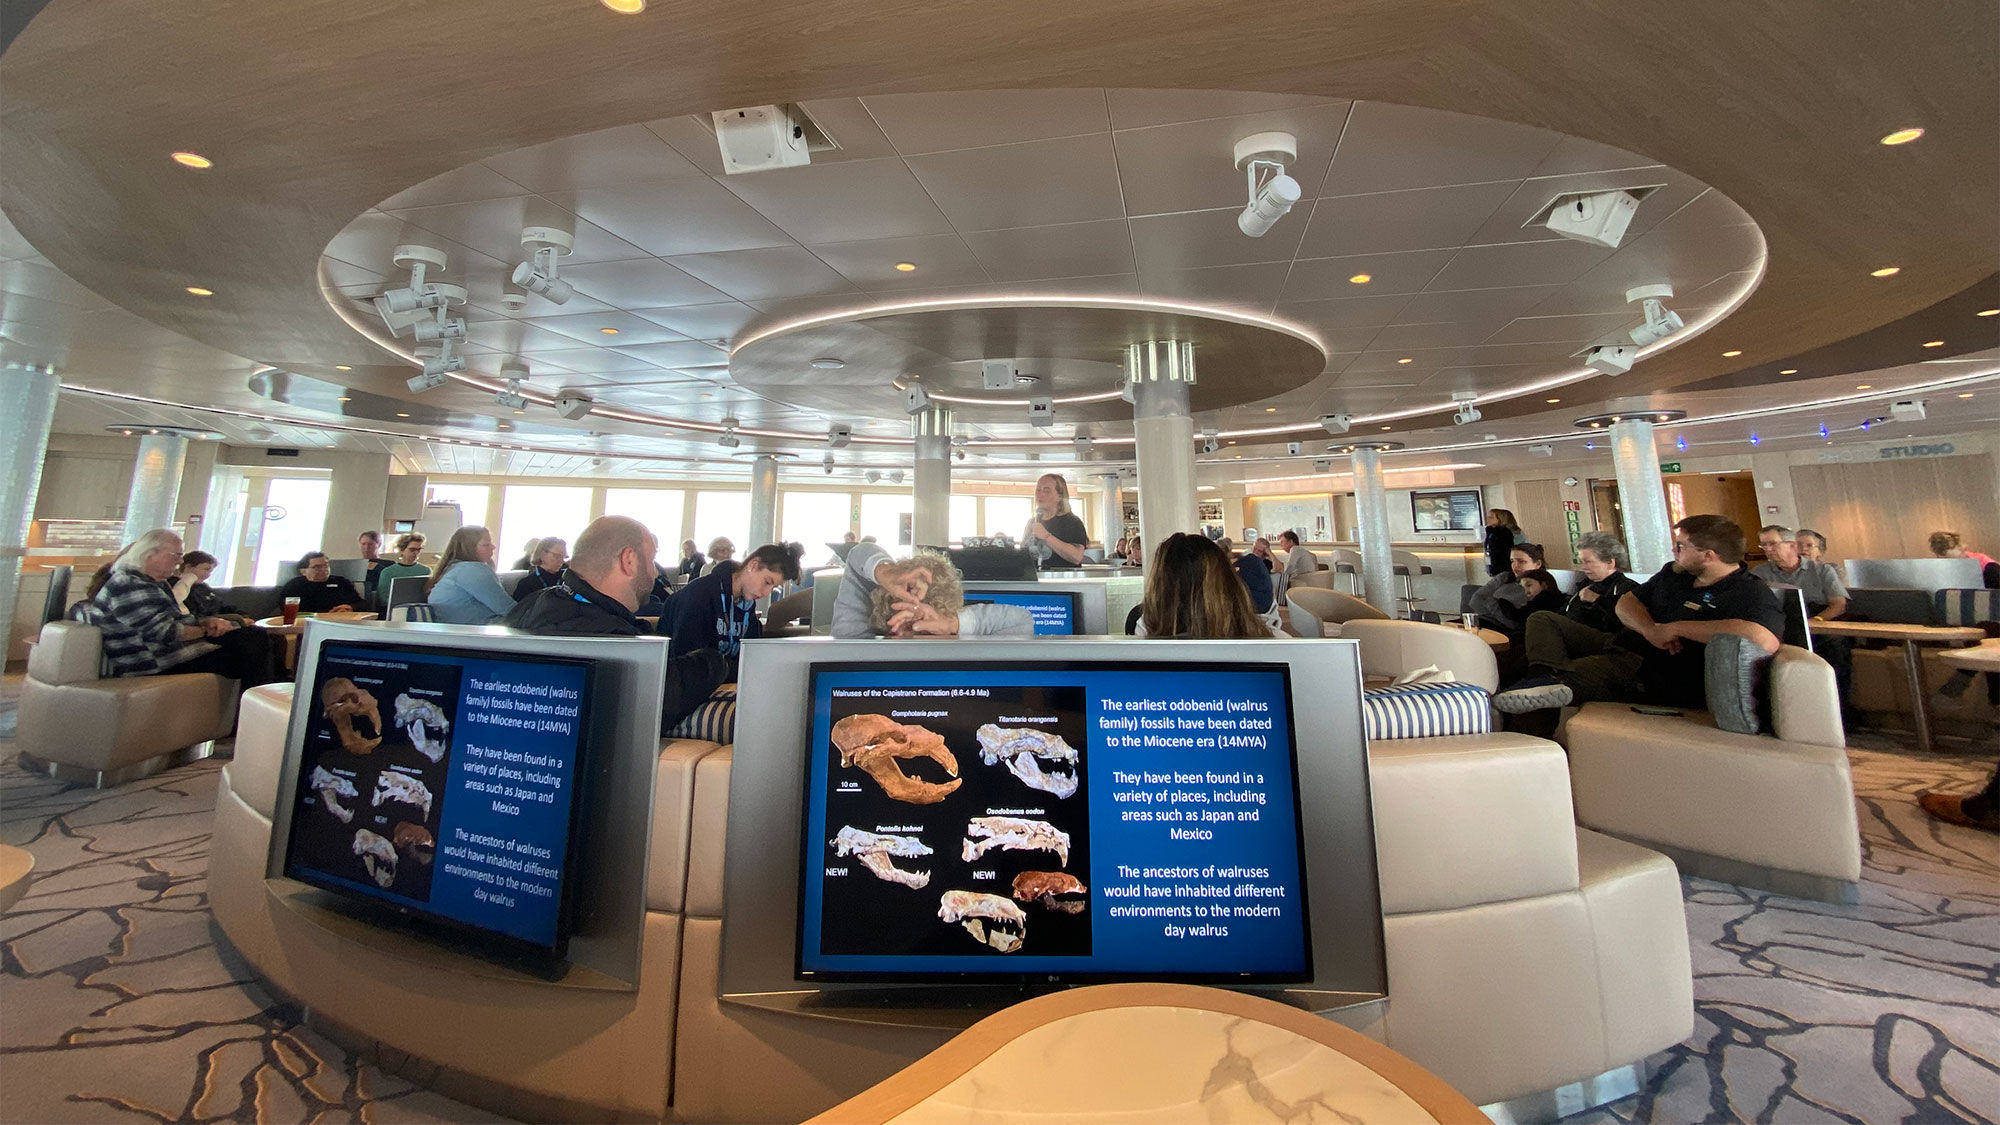 Lindblad fans will note that the Ice Lounge is the fleet's most state-of-the-art gathering area for daily talks and presentations, with high-definition screens in every seating nook.